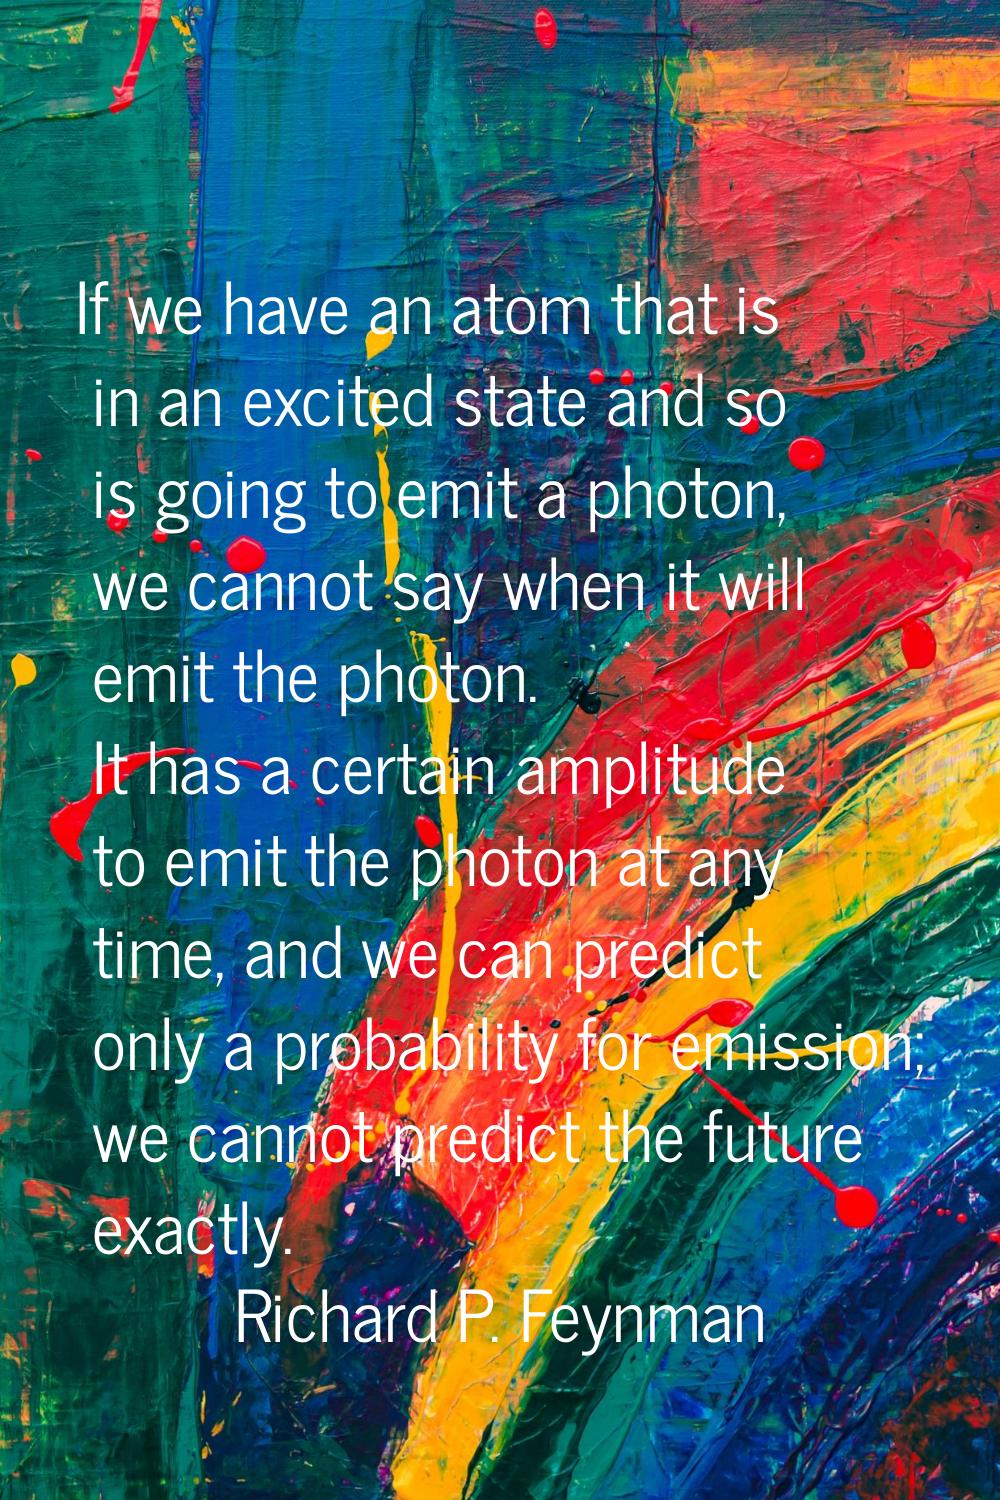 If we have an atom that is in an excited state and so is going to emit a photon, we cannot say when